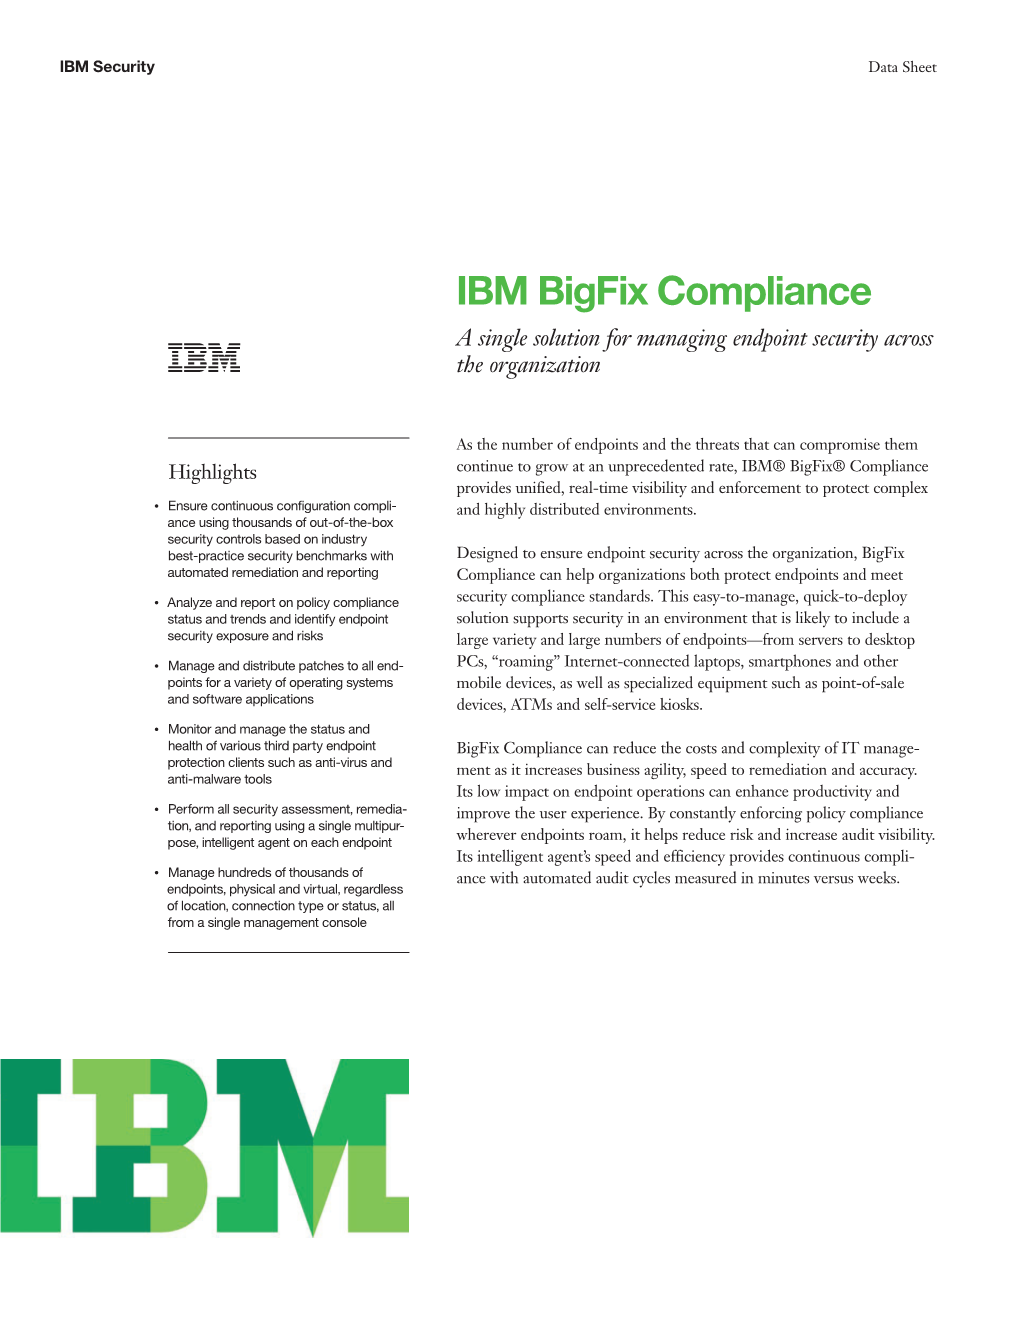 IBM Bigfix Compliance a Single Solution for Managing Endpoint Security Across the Organization